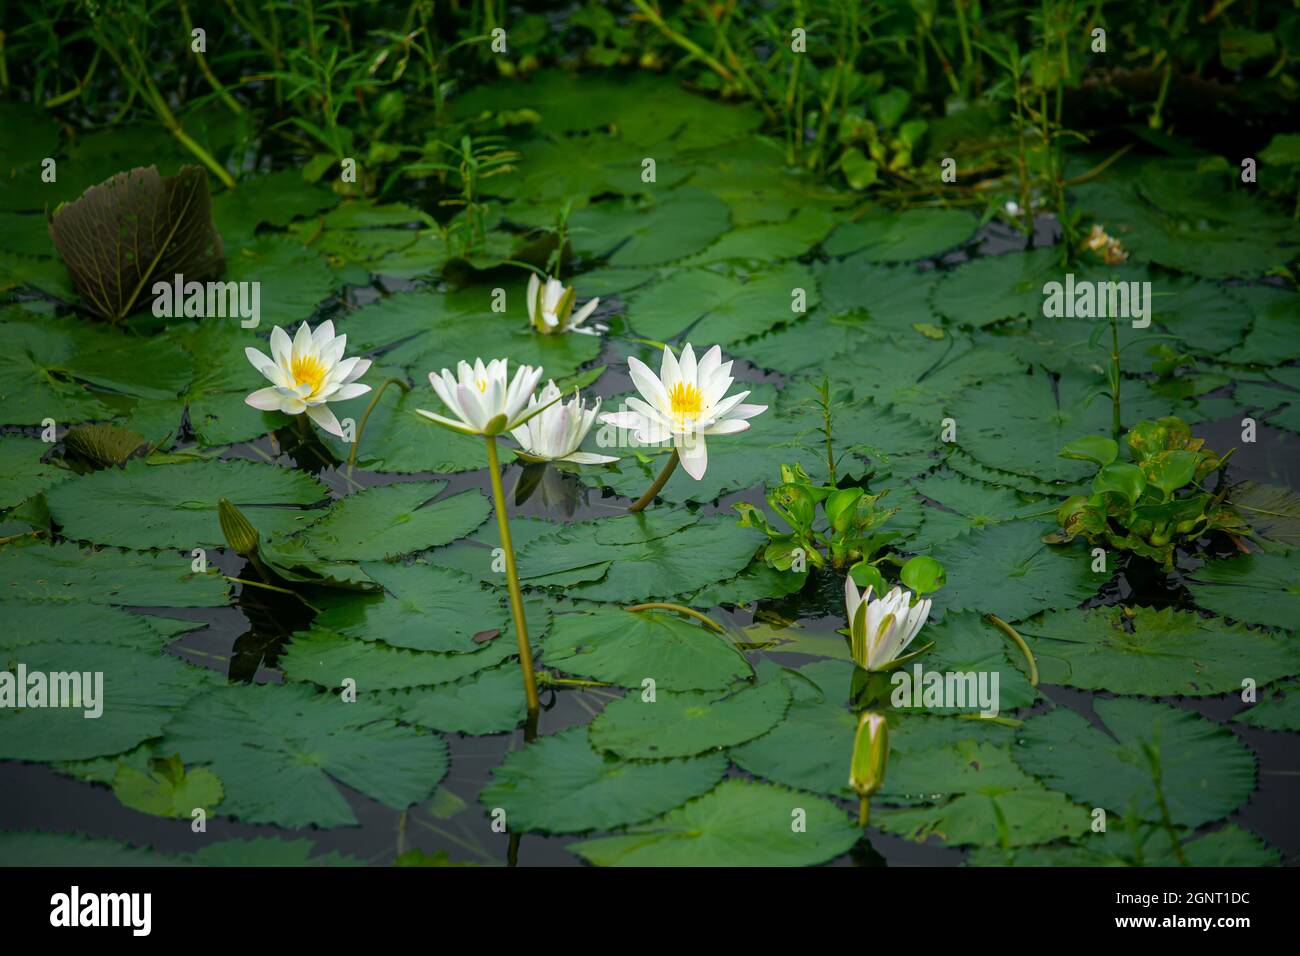 Water Lily (Nymphaeaceae, water lilies, lilly) blooming in pond. Rivers and ponds are filled with white water lilies during the rainy season. The nati Stock Photo